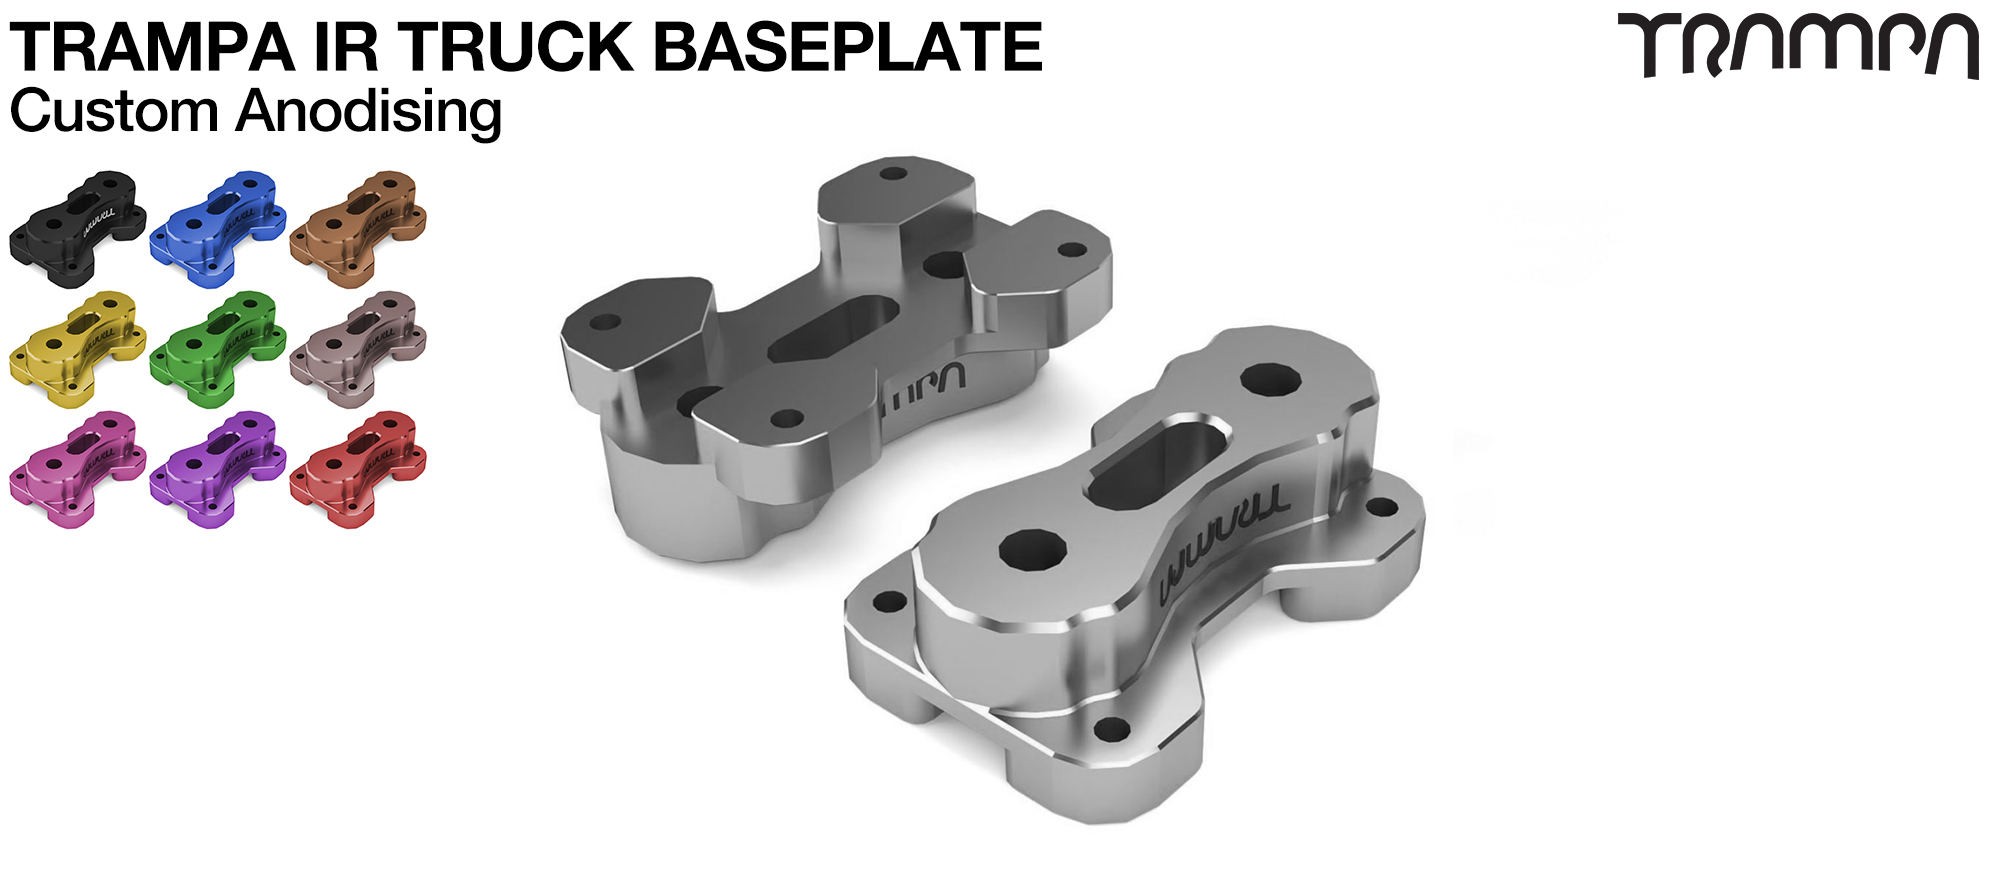 TRAMPA IR BASEPLATE - CNC Precision made TRAMPA IR Trucks are super light & Packed with performance